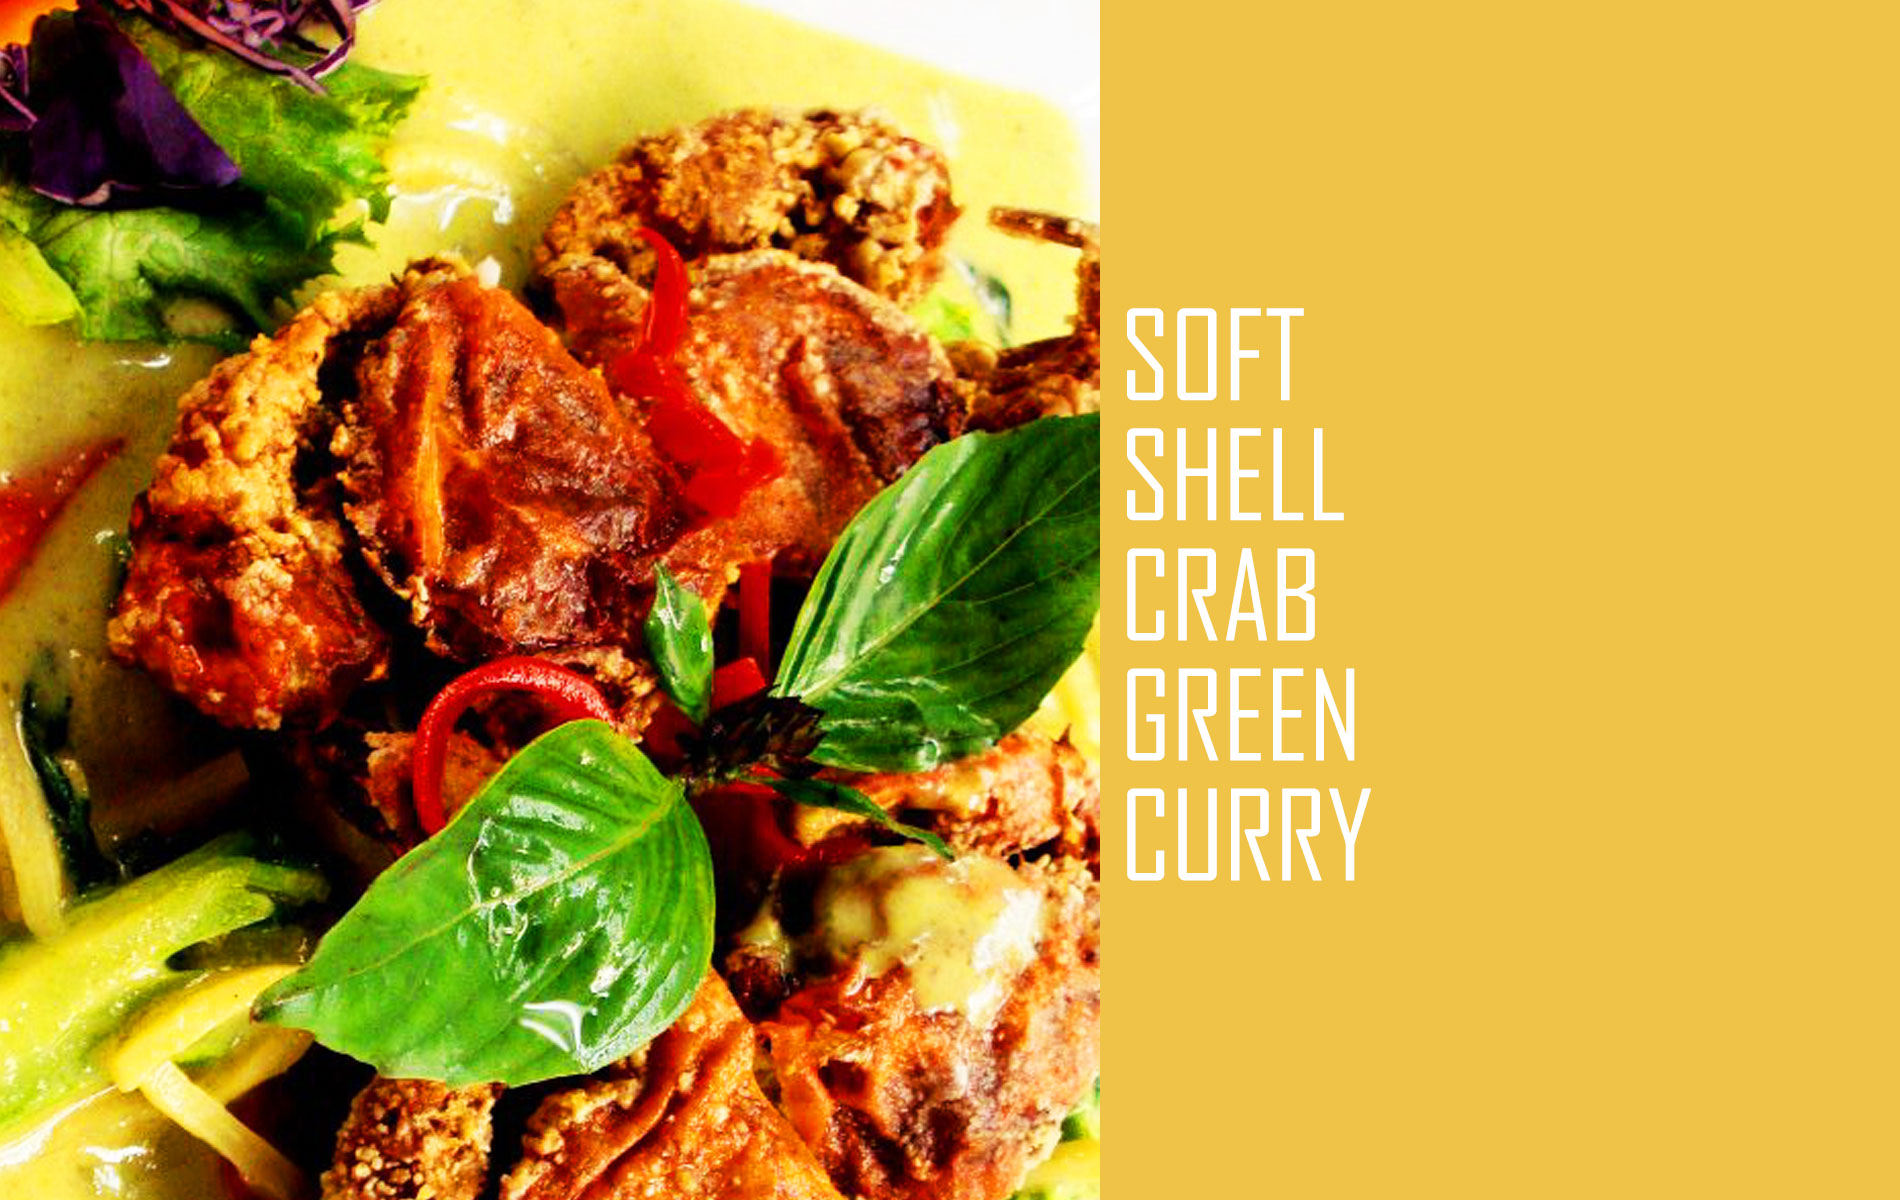 Soft Shell Crab Green Curry